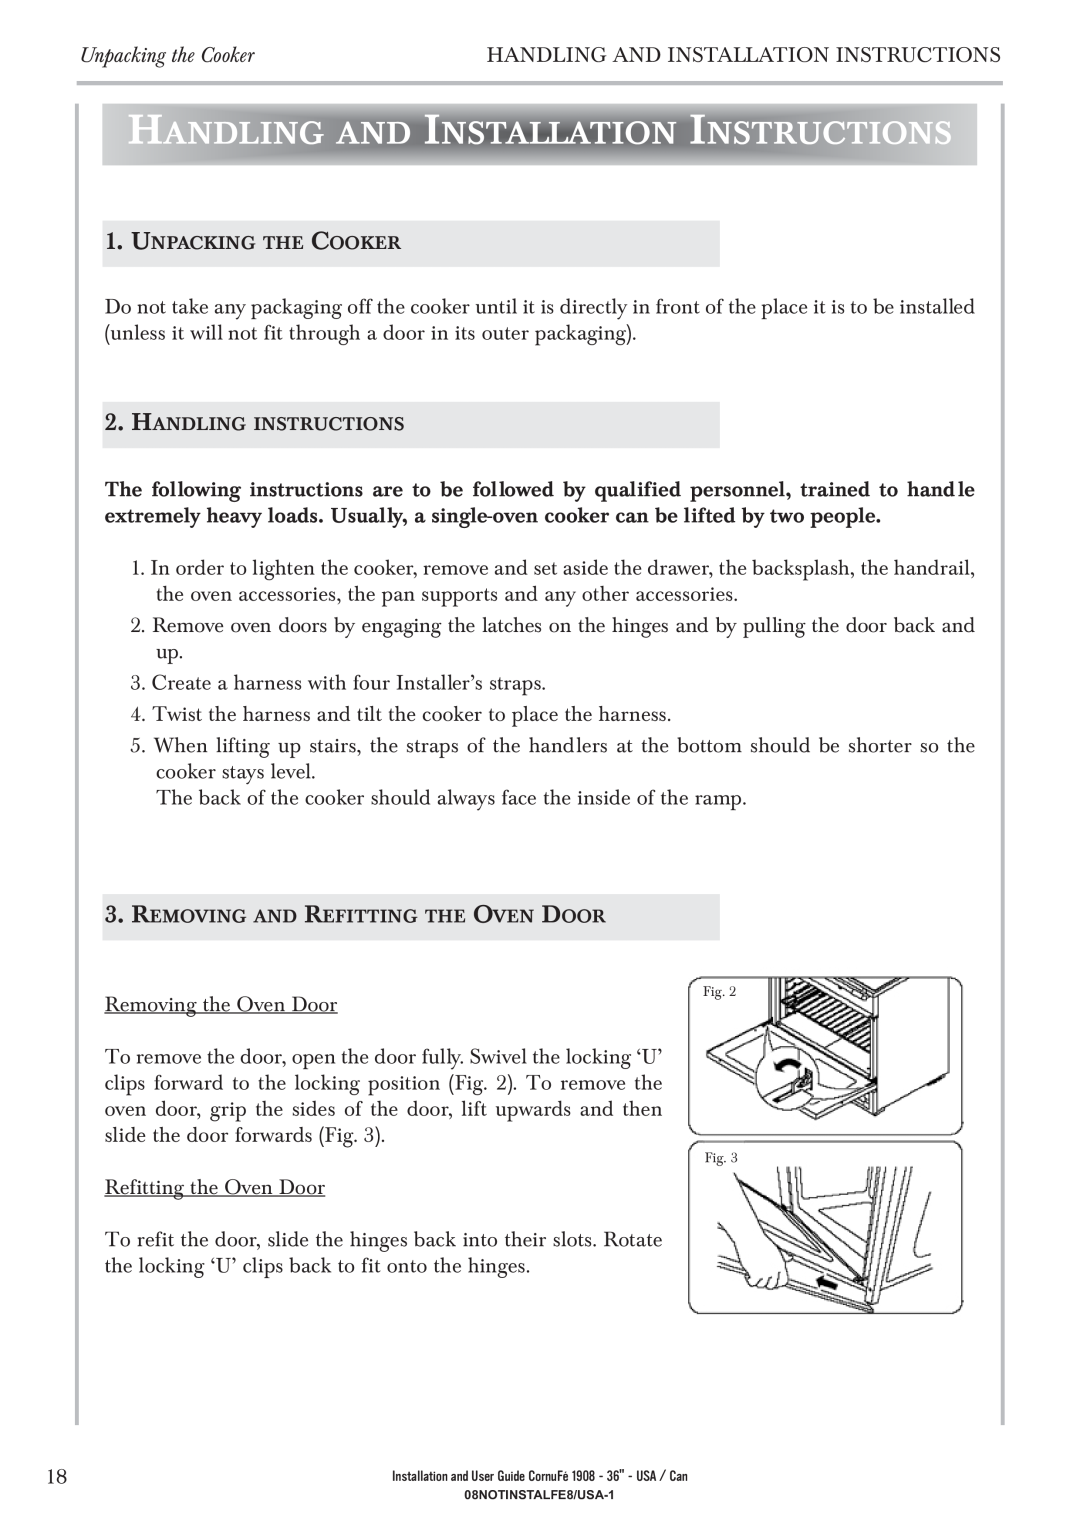 GE 1908 - 36 manual Handling And Installation Instructions 